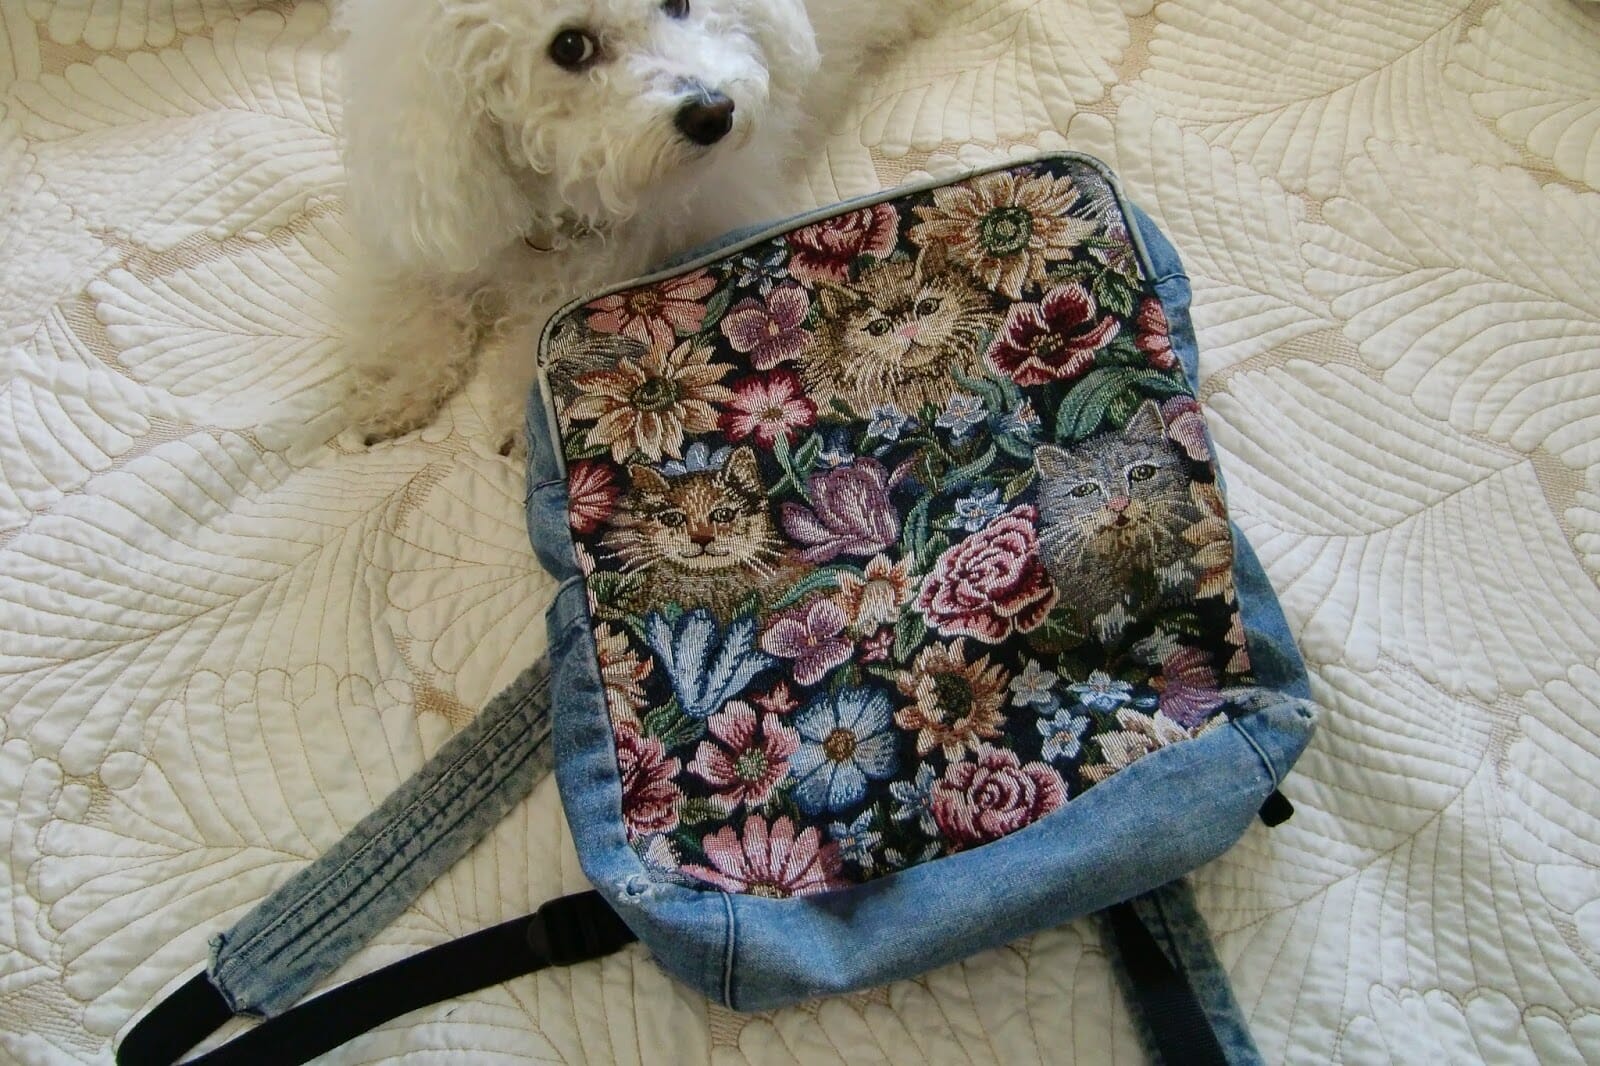 TBT: My Backpack